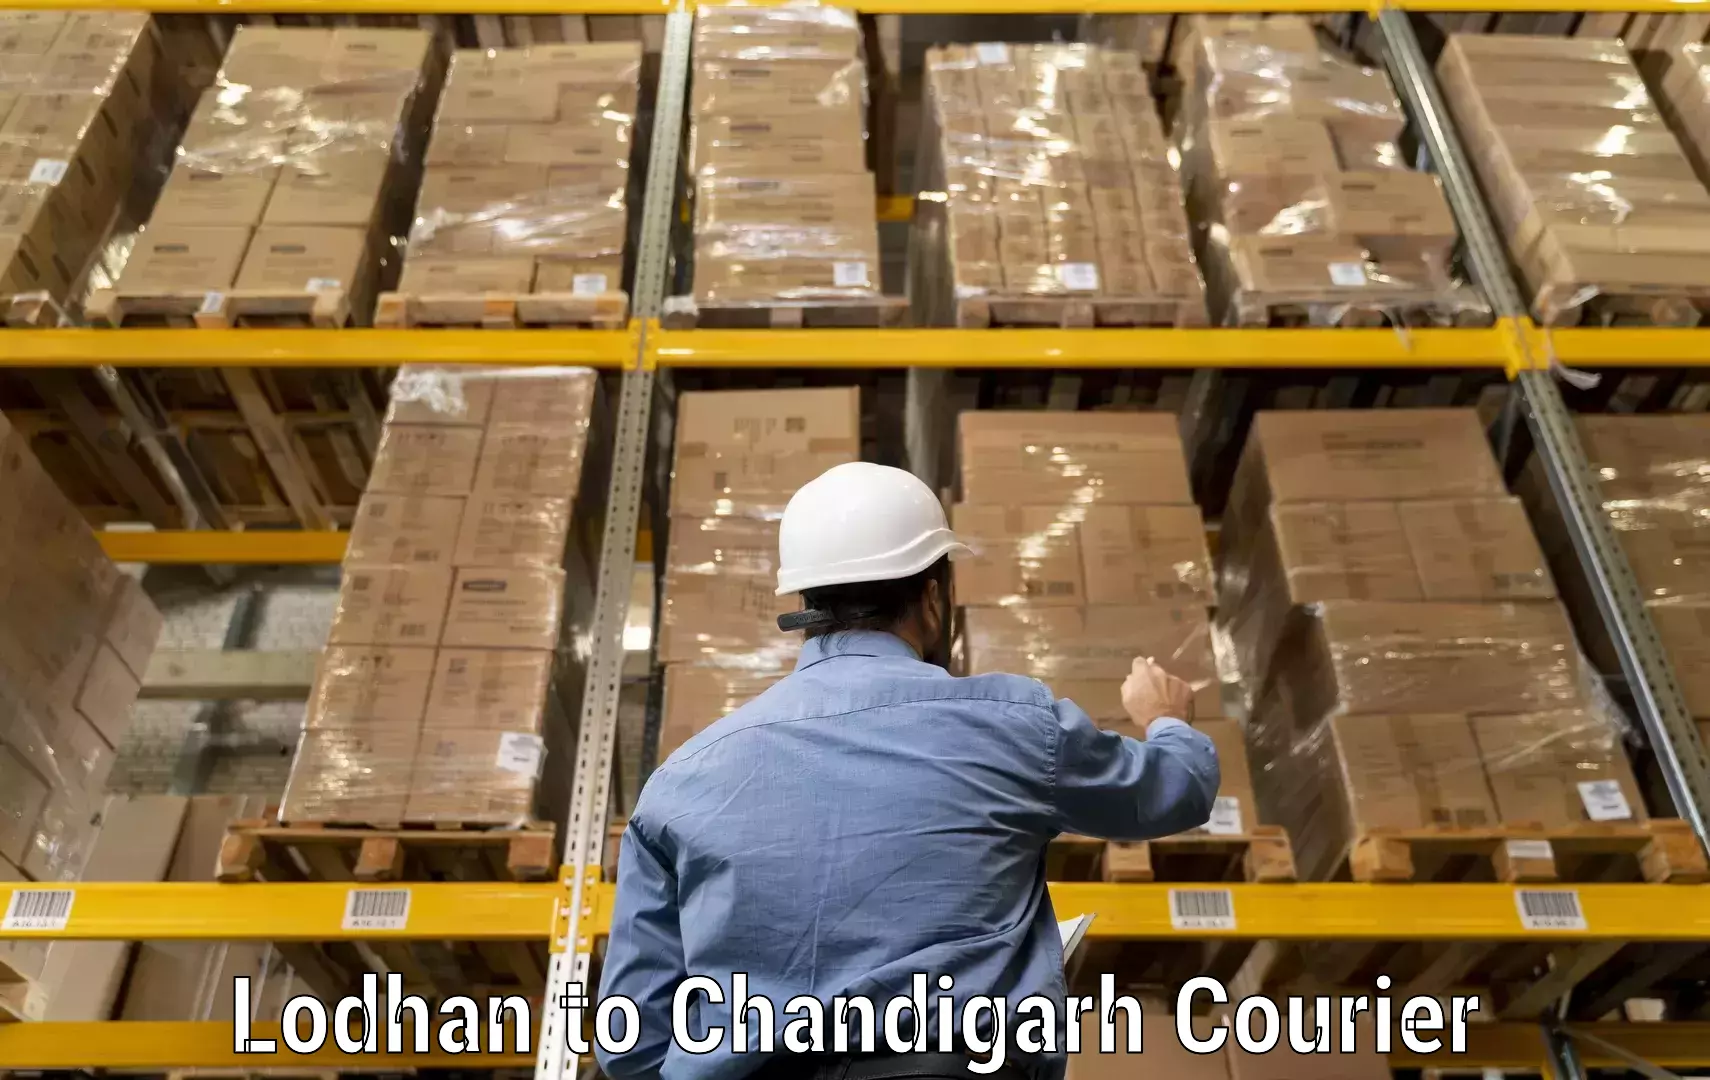 Subscription-based courier Lodhan to Chandigarh